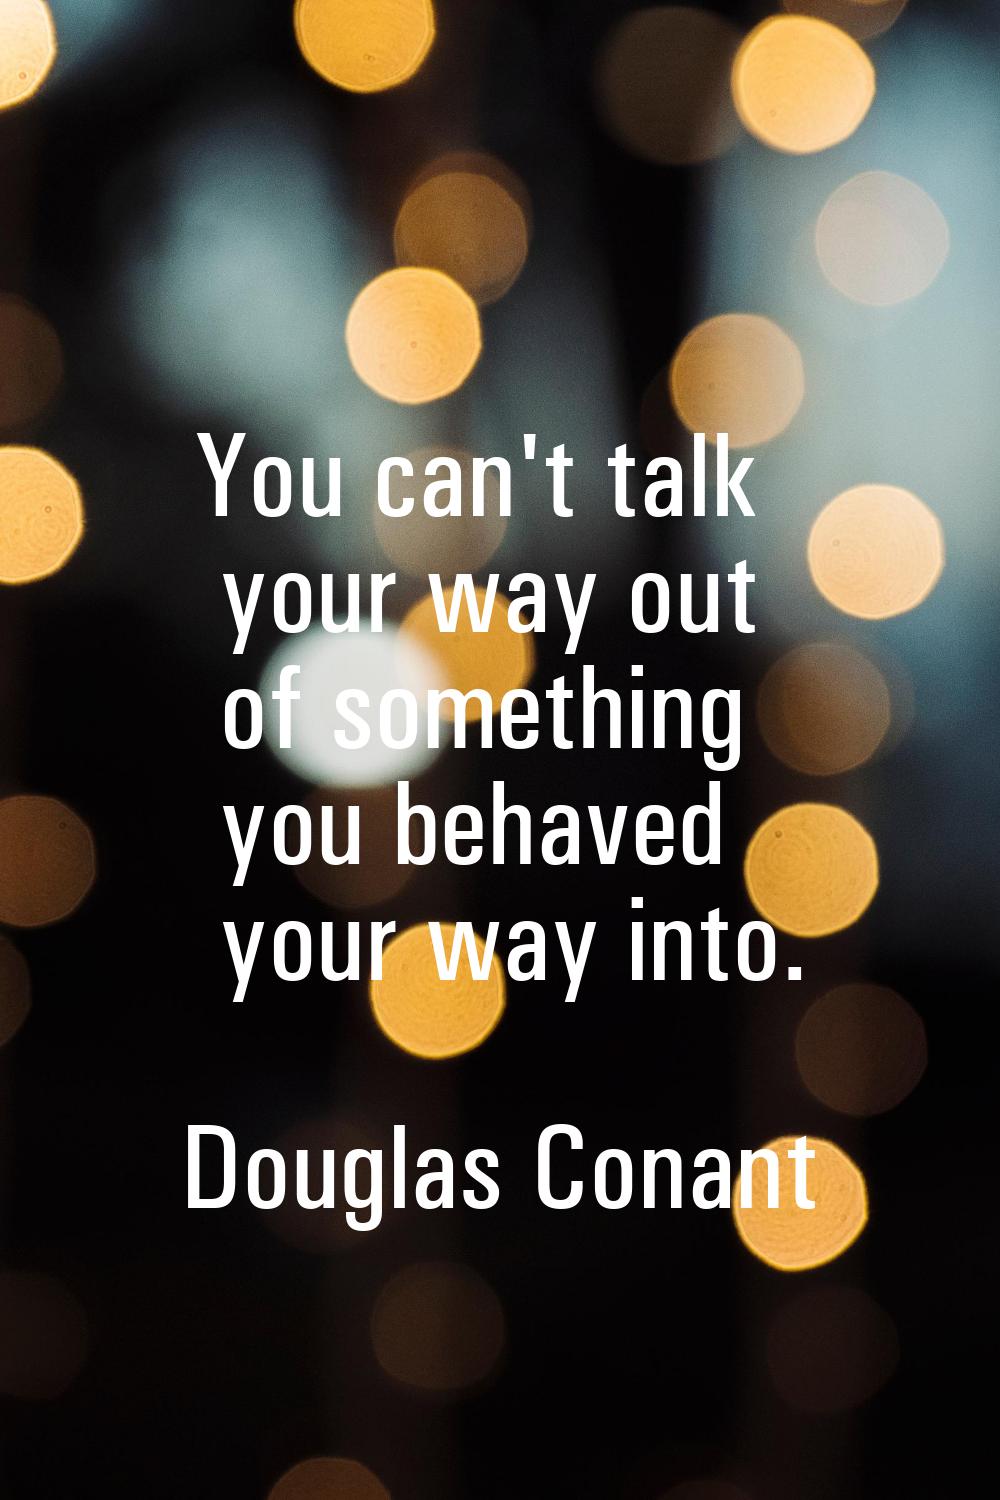 You can't talk your way out of something you behaved your way into.